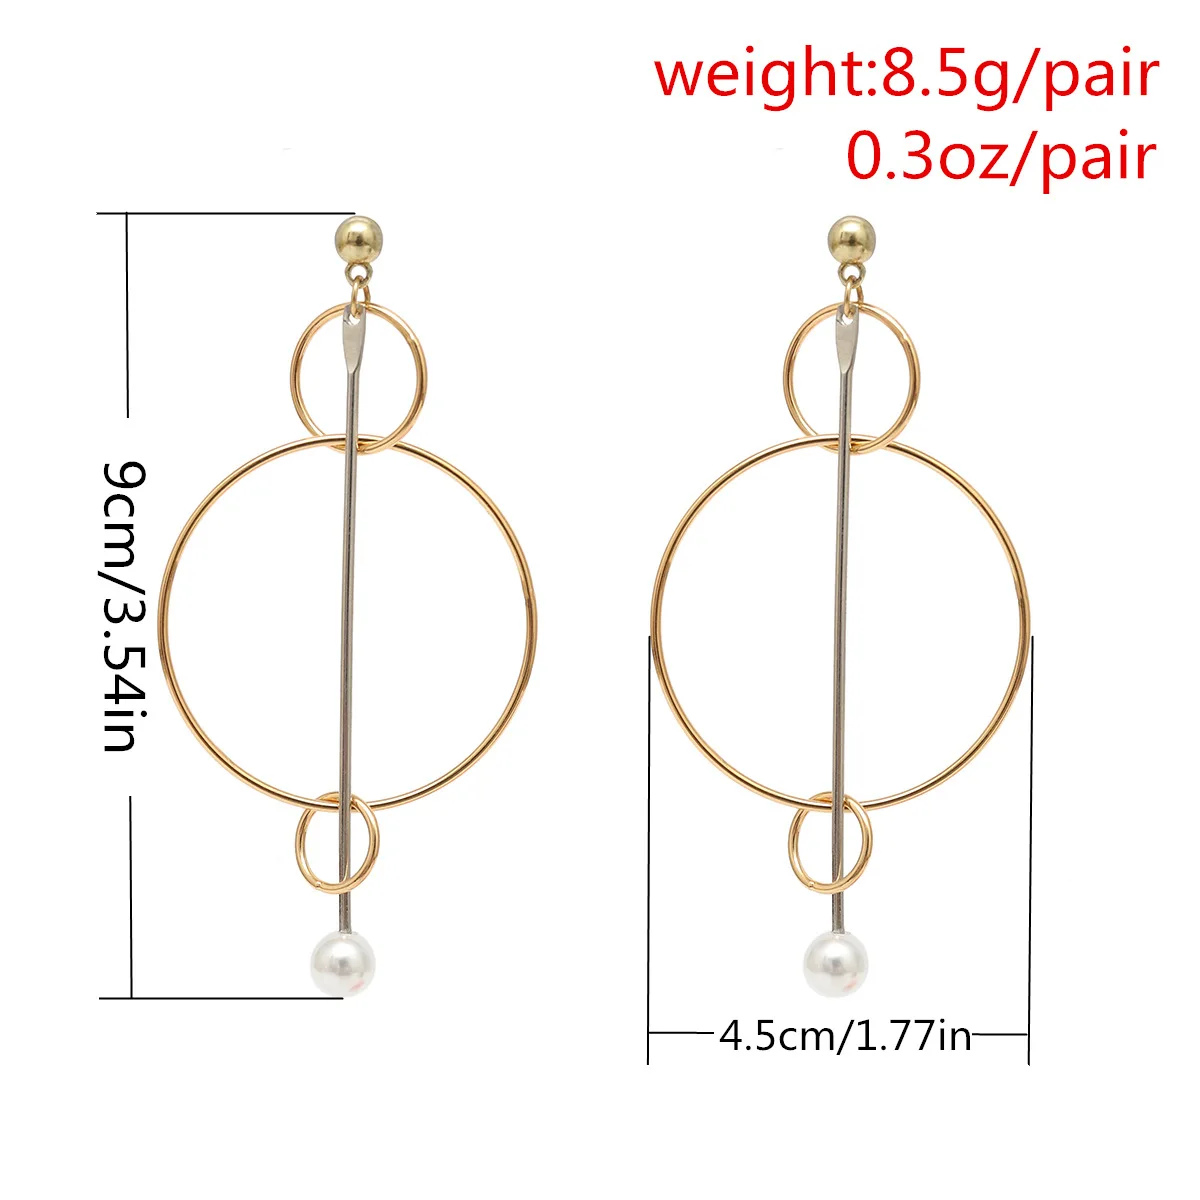 Fashion New Gold Earring Designs Without Stones Geometric Circles Earring